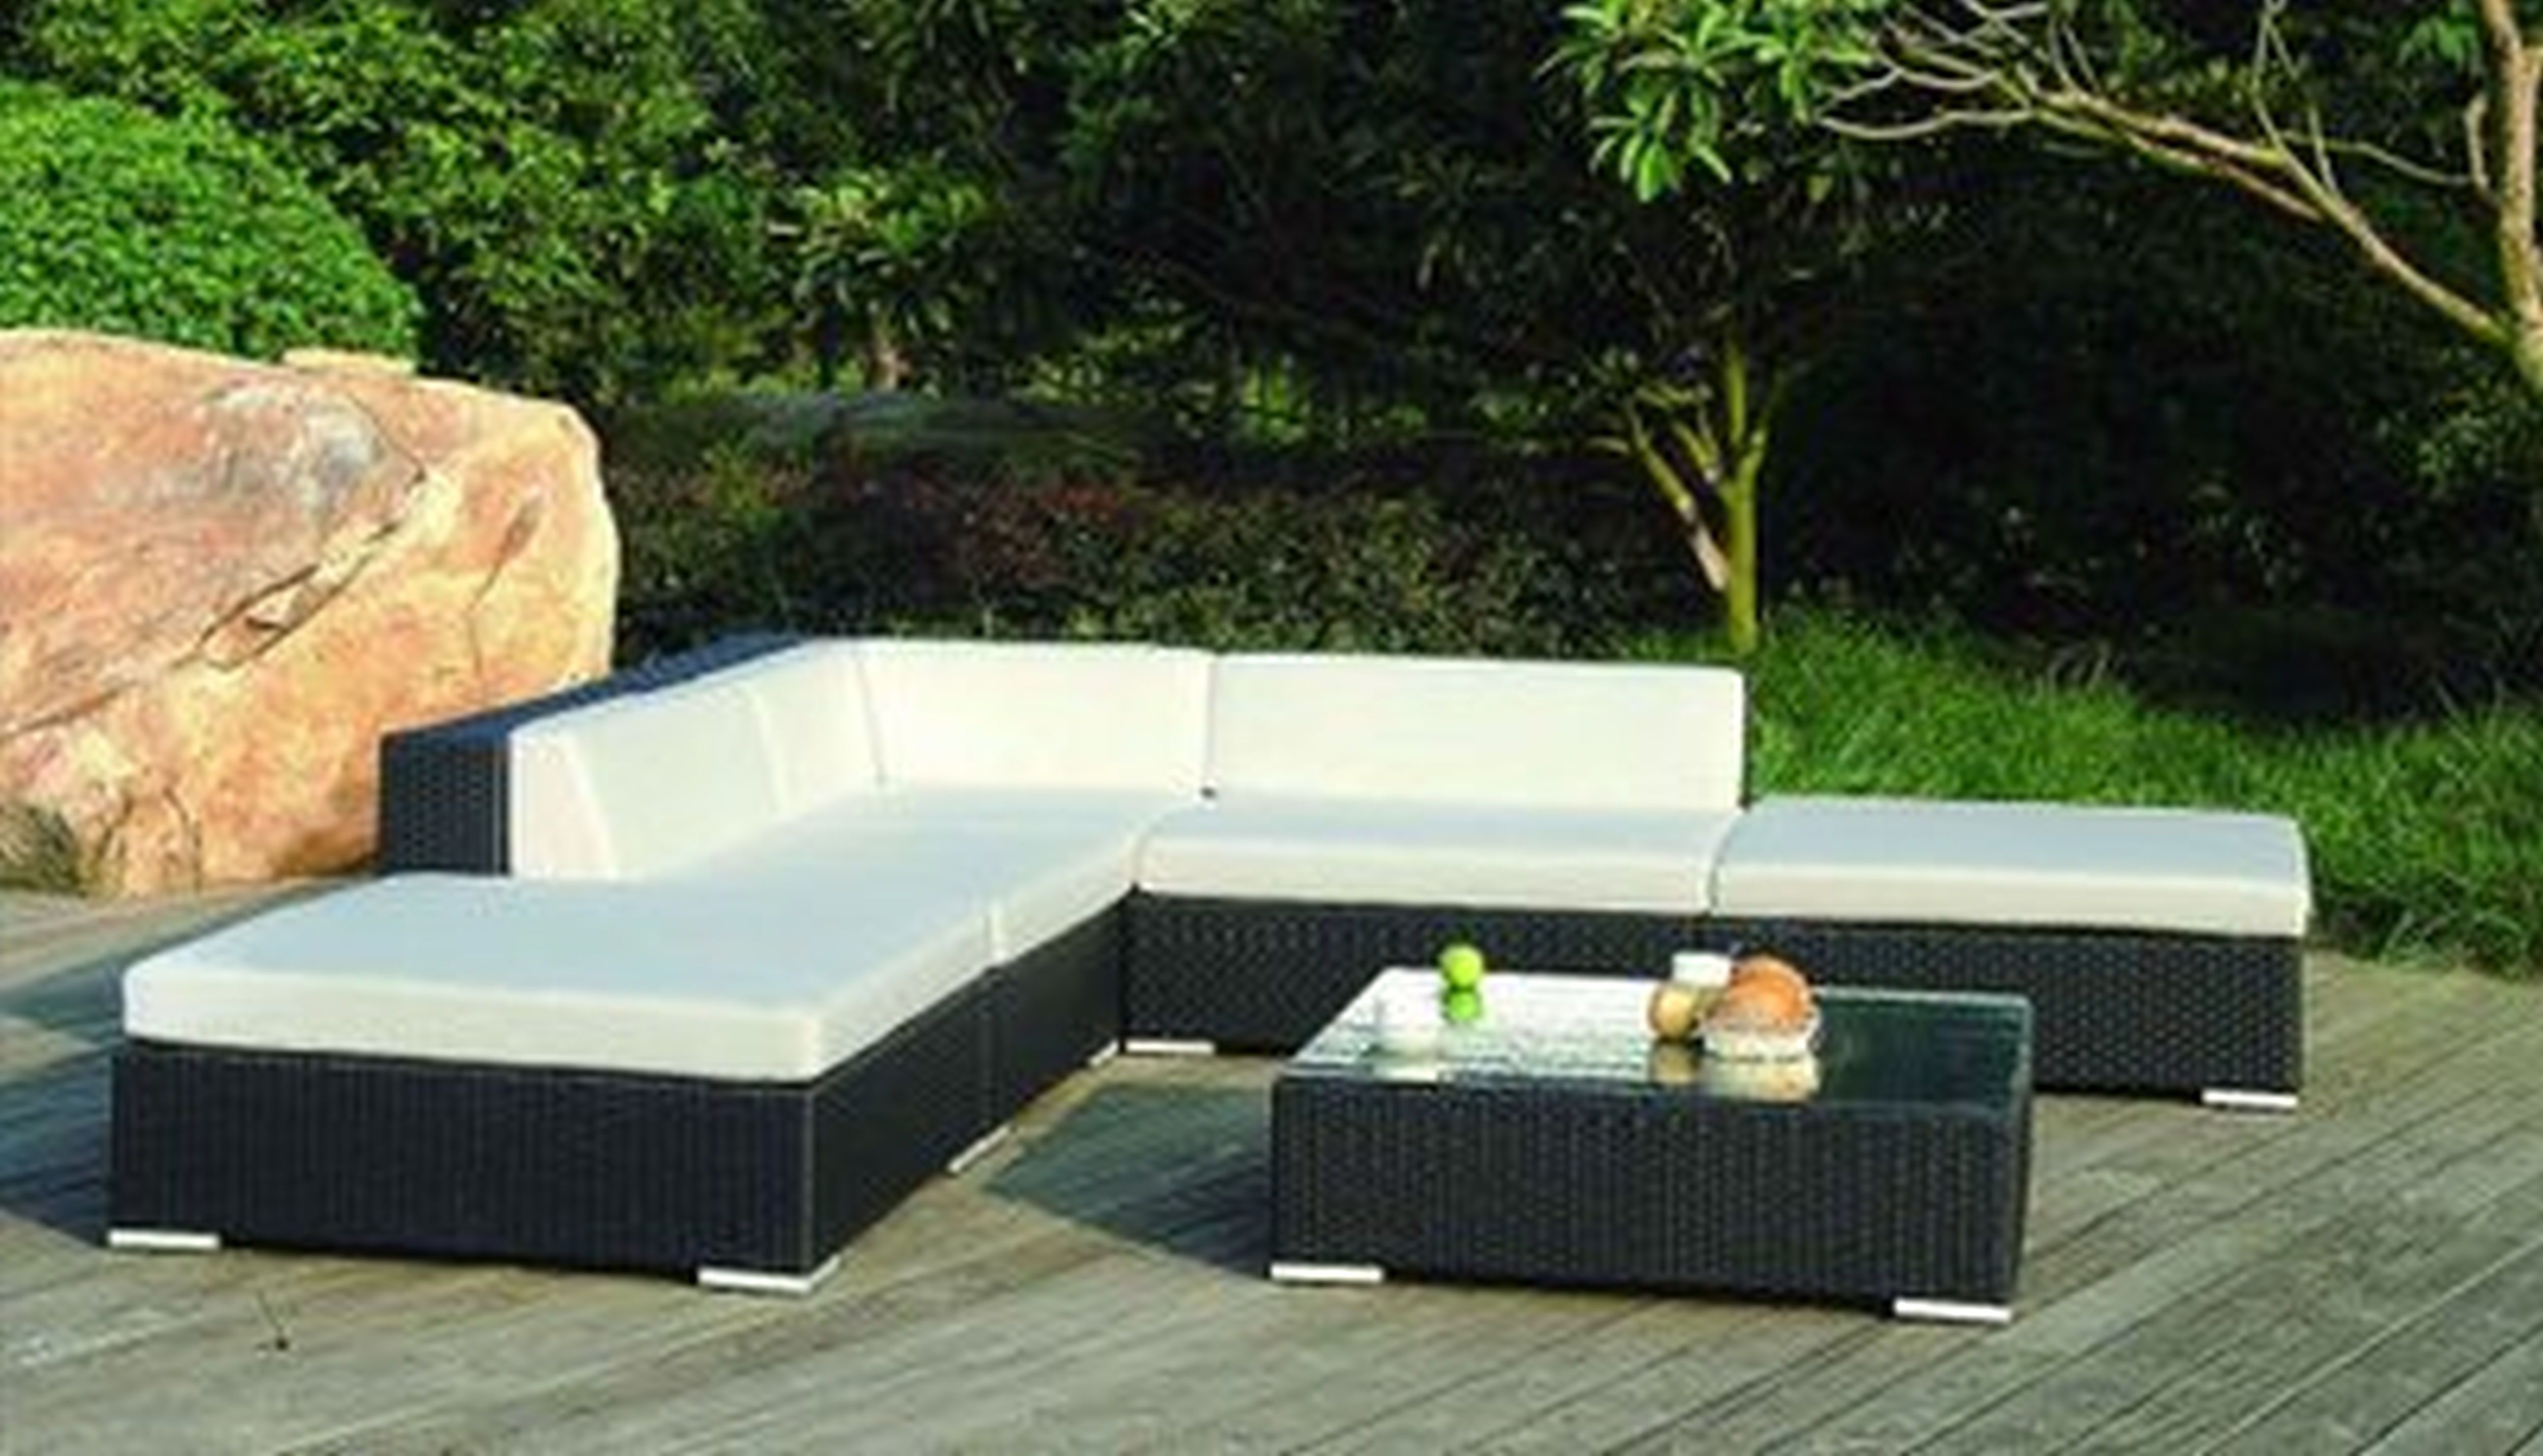 Best And Newest Patio Sofas Regarding Funiture: Modern Outdoor Affordable Furniture Using Resin Wicker (View 13 of 20)